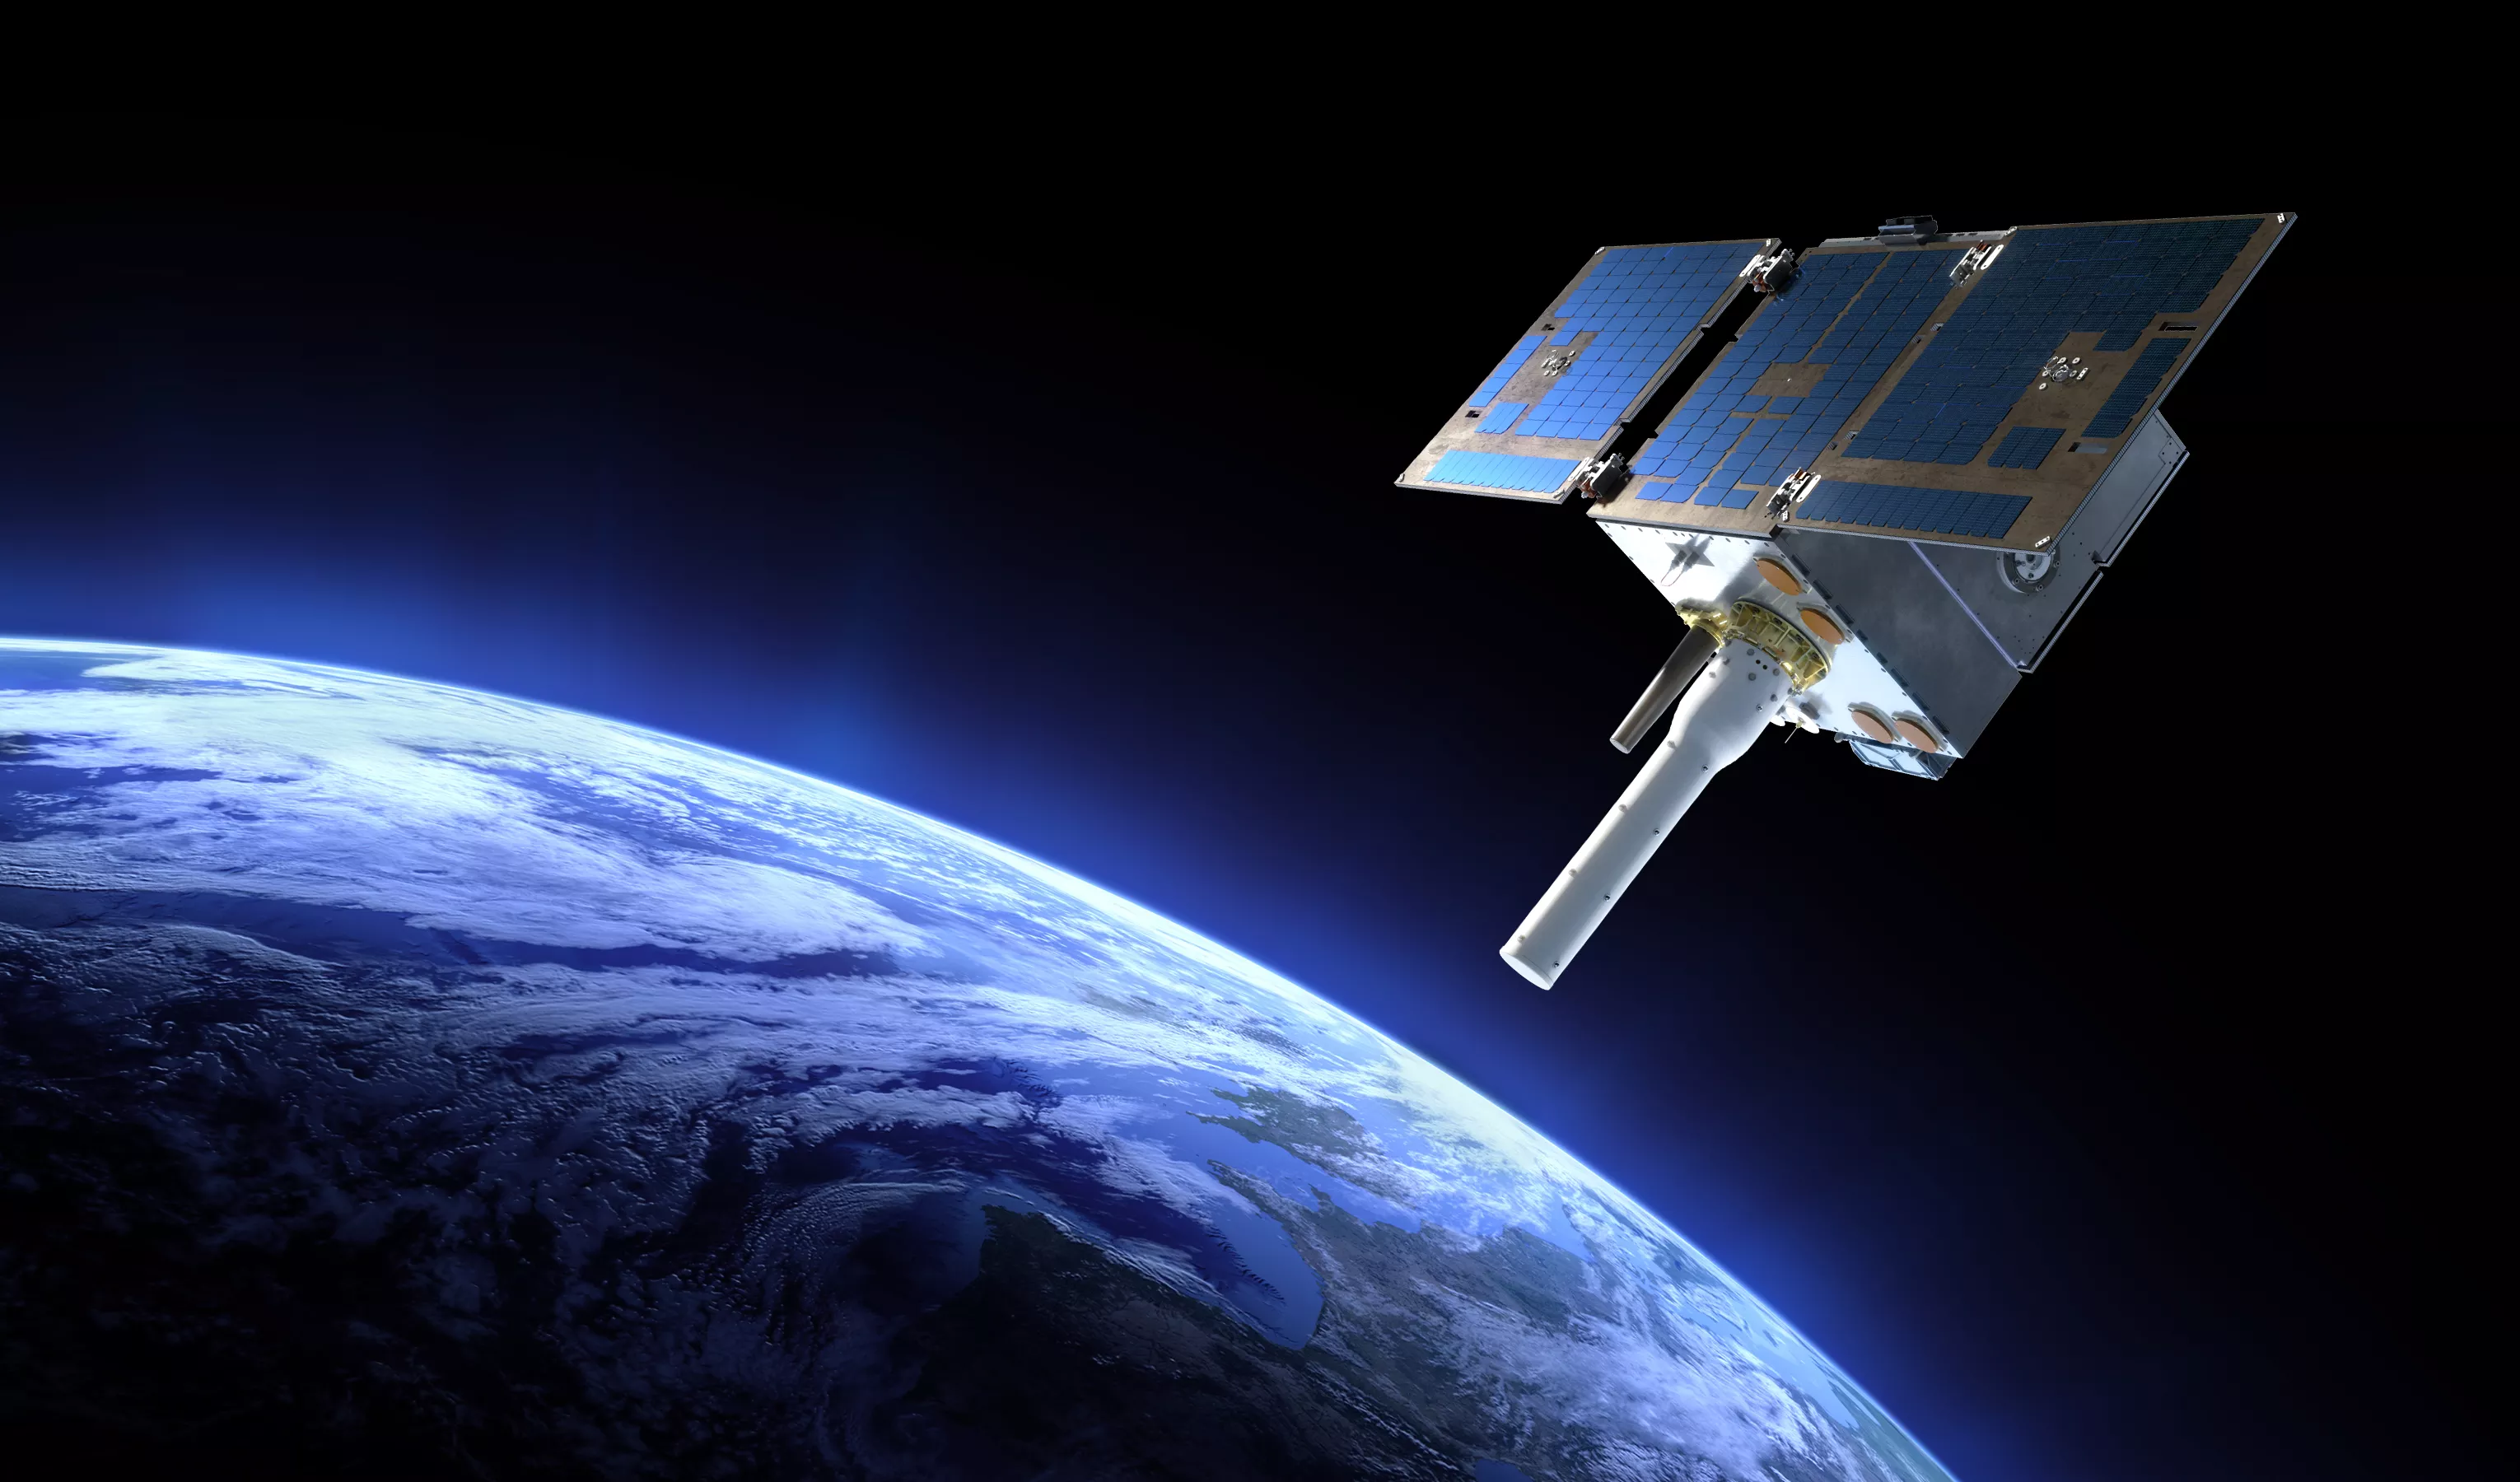 An artist's rendering of General Atomics' GAzelle satellite orbiting the Earth, which is hosting the Argos-4 instrument